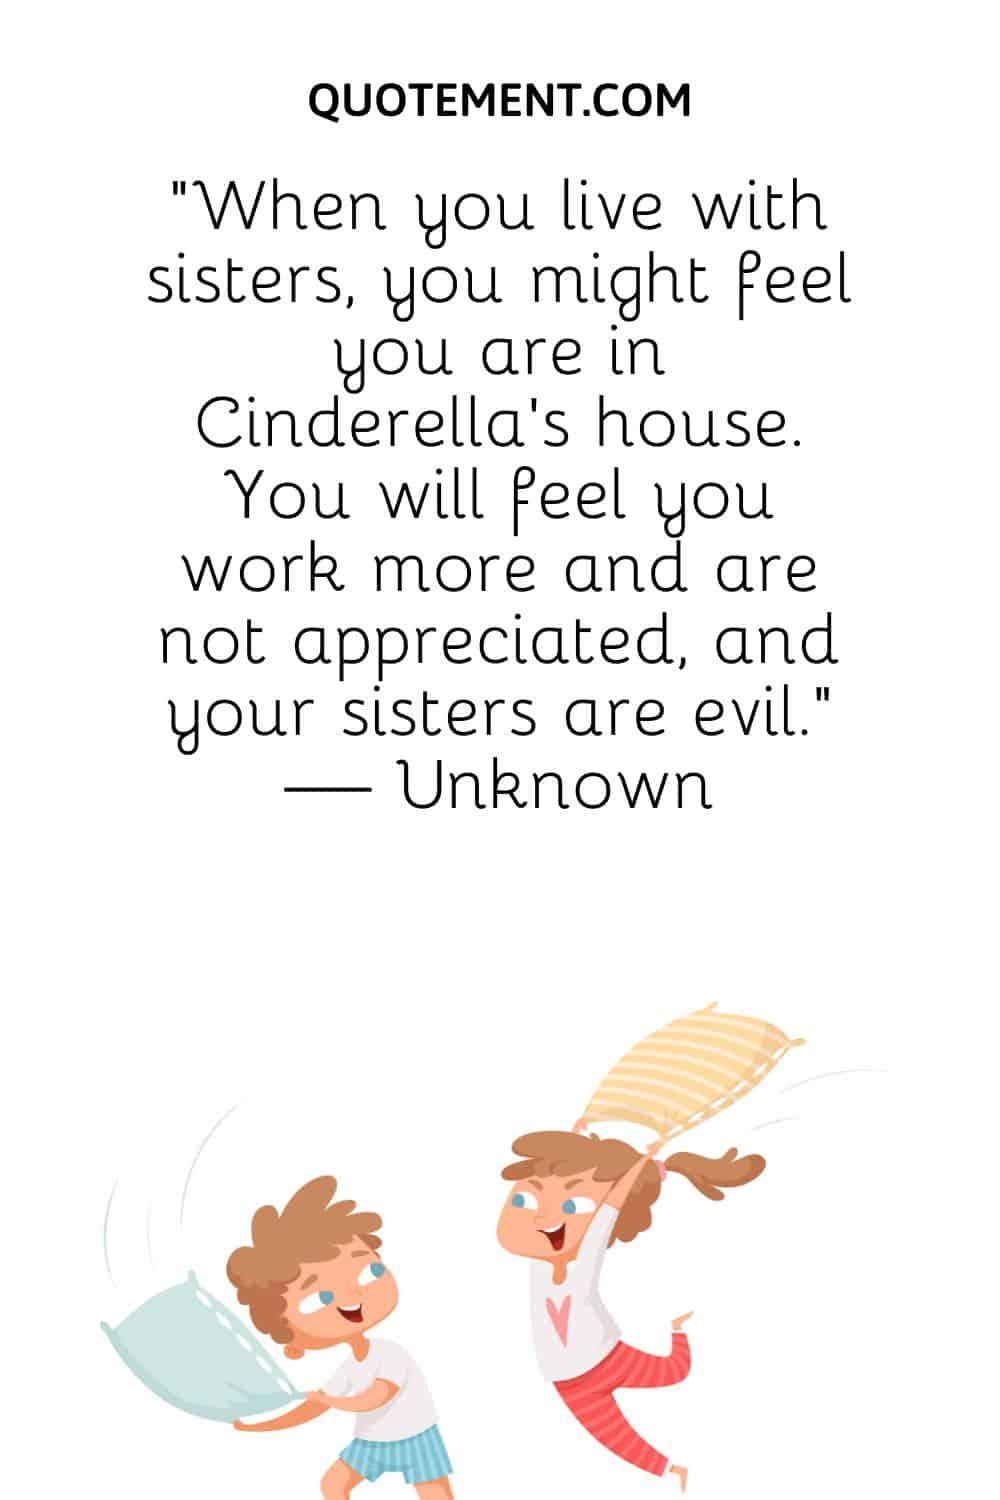 When you live with sisters, you might feel you are in Cinderella’s house.